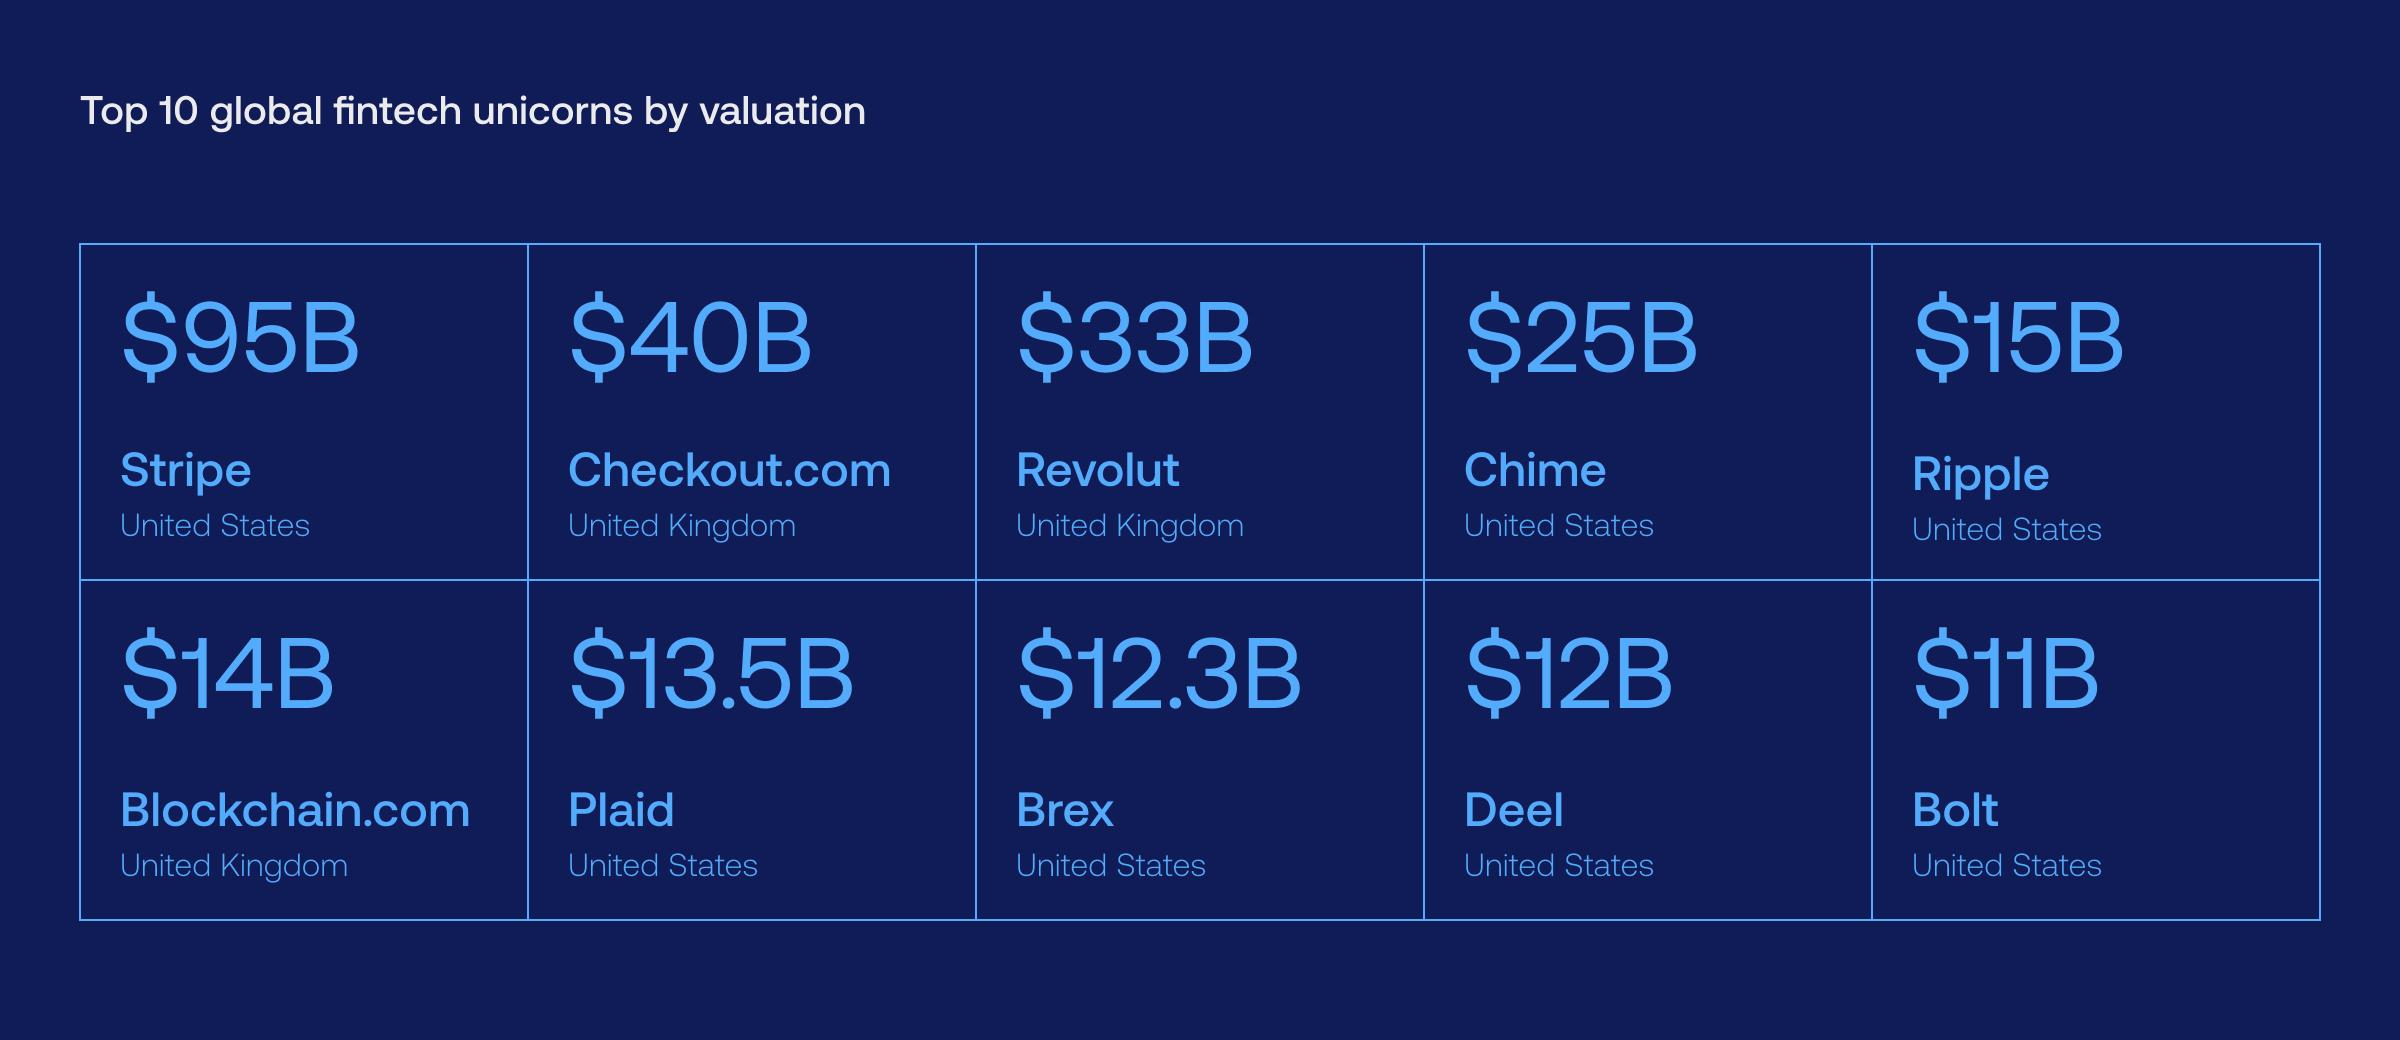 Top 10 global fintech unicorns by valuation